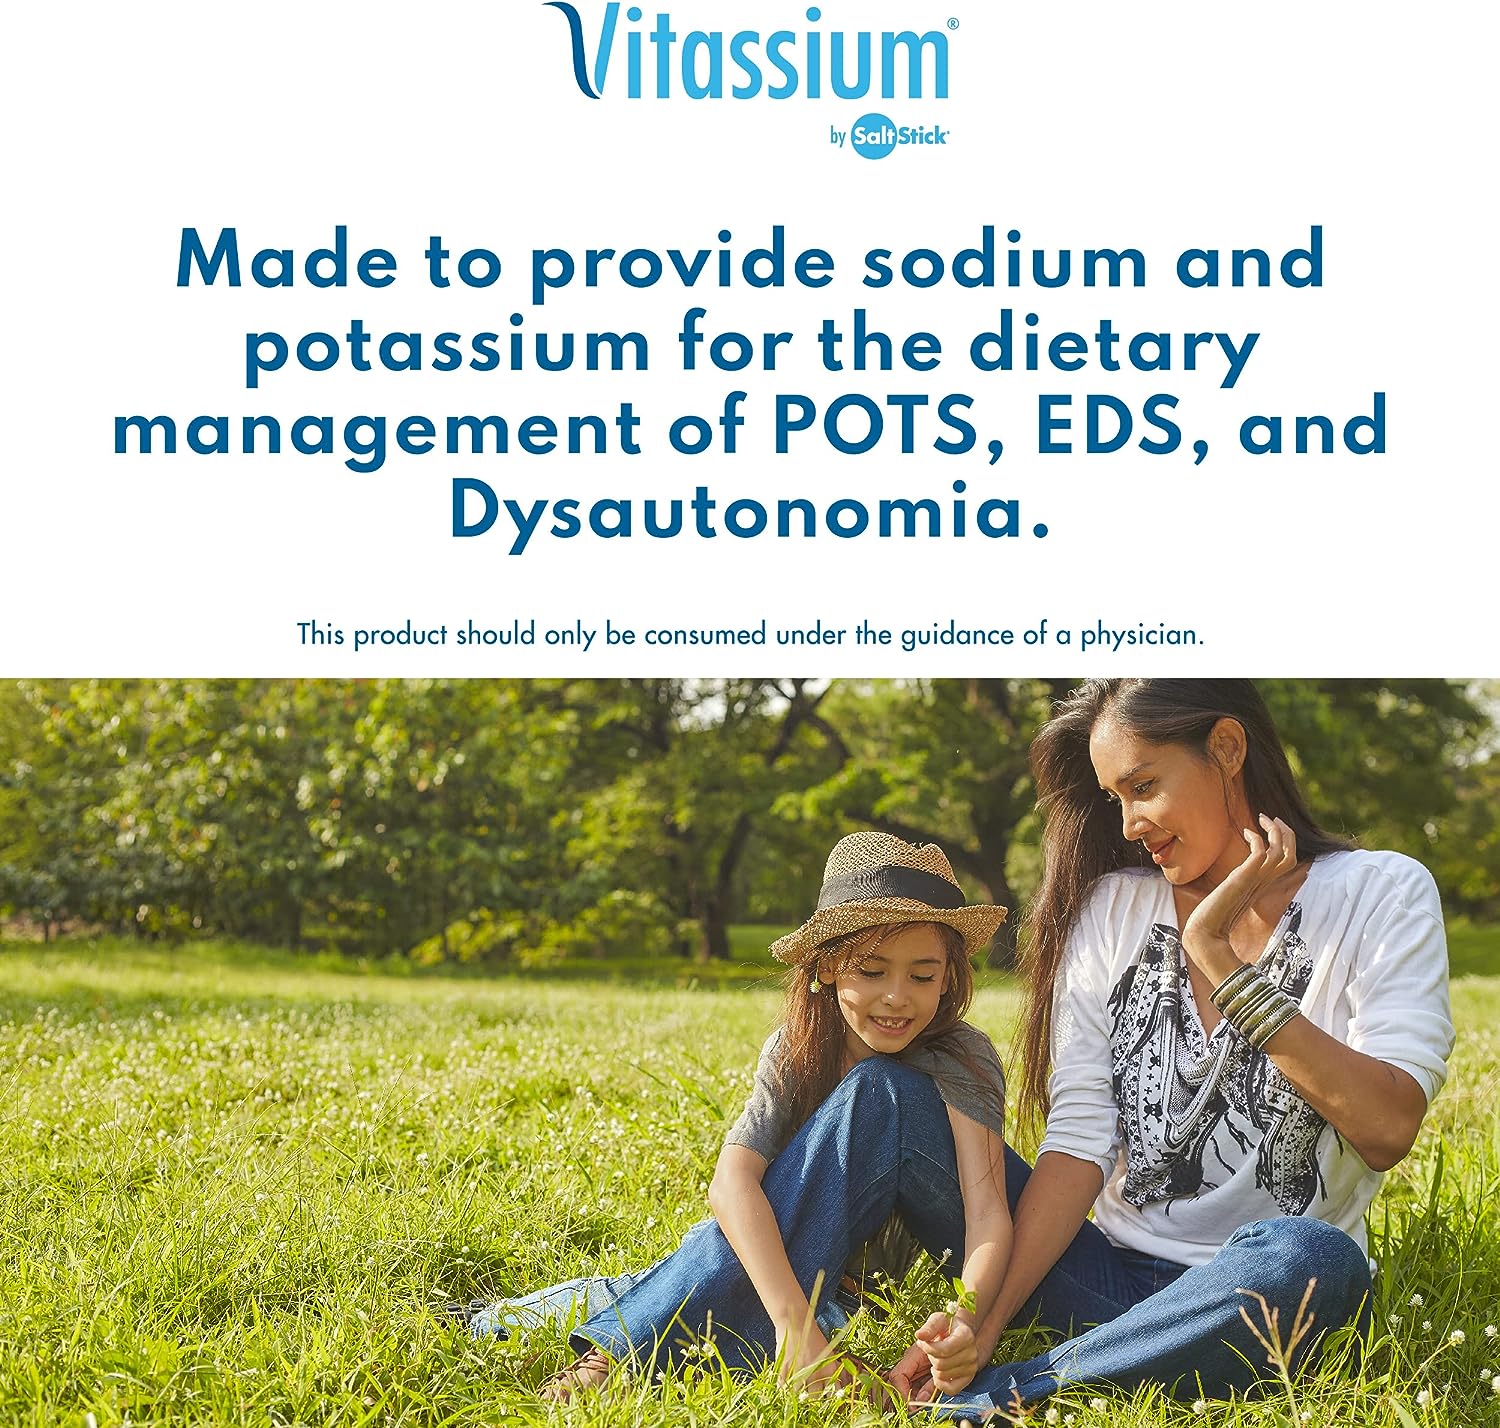 Made to provide sodium and potassium for the dietary management of POTS, EDS and dysautonomia